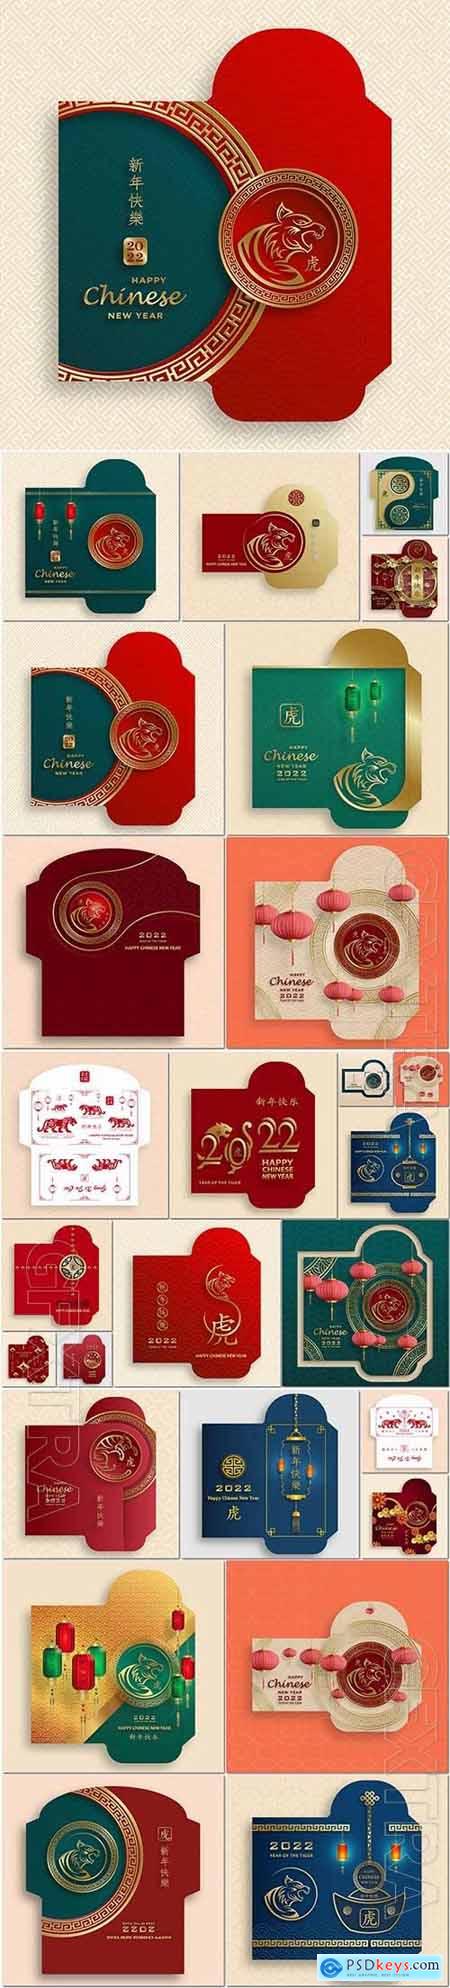 Chinese new year 2022 lucky envelope money packet with gold paper cut art and craft style